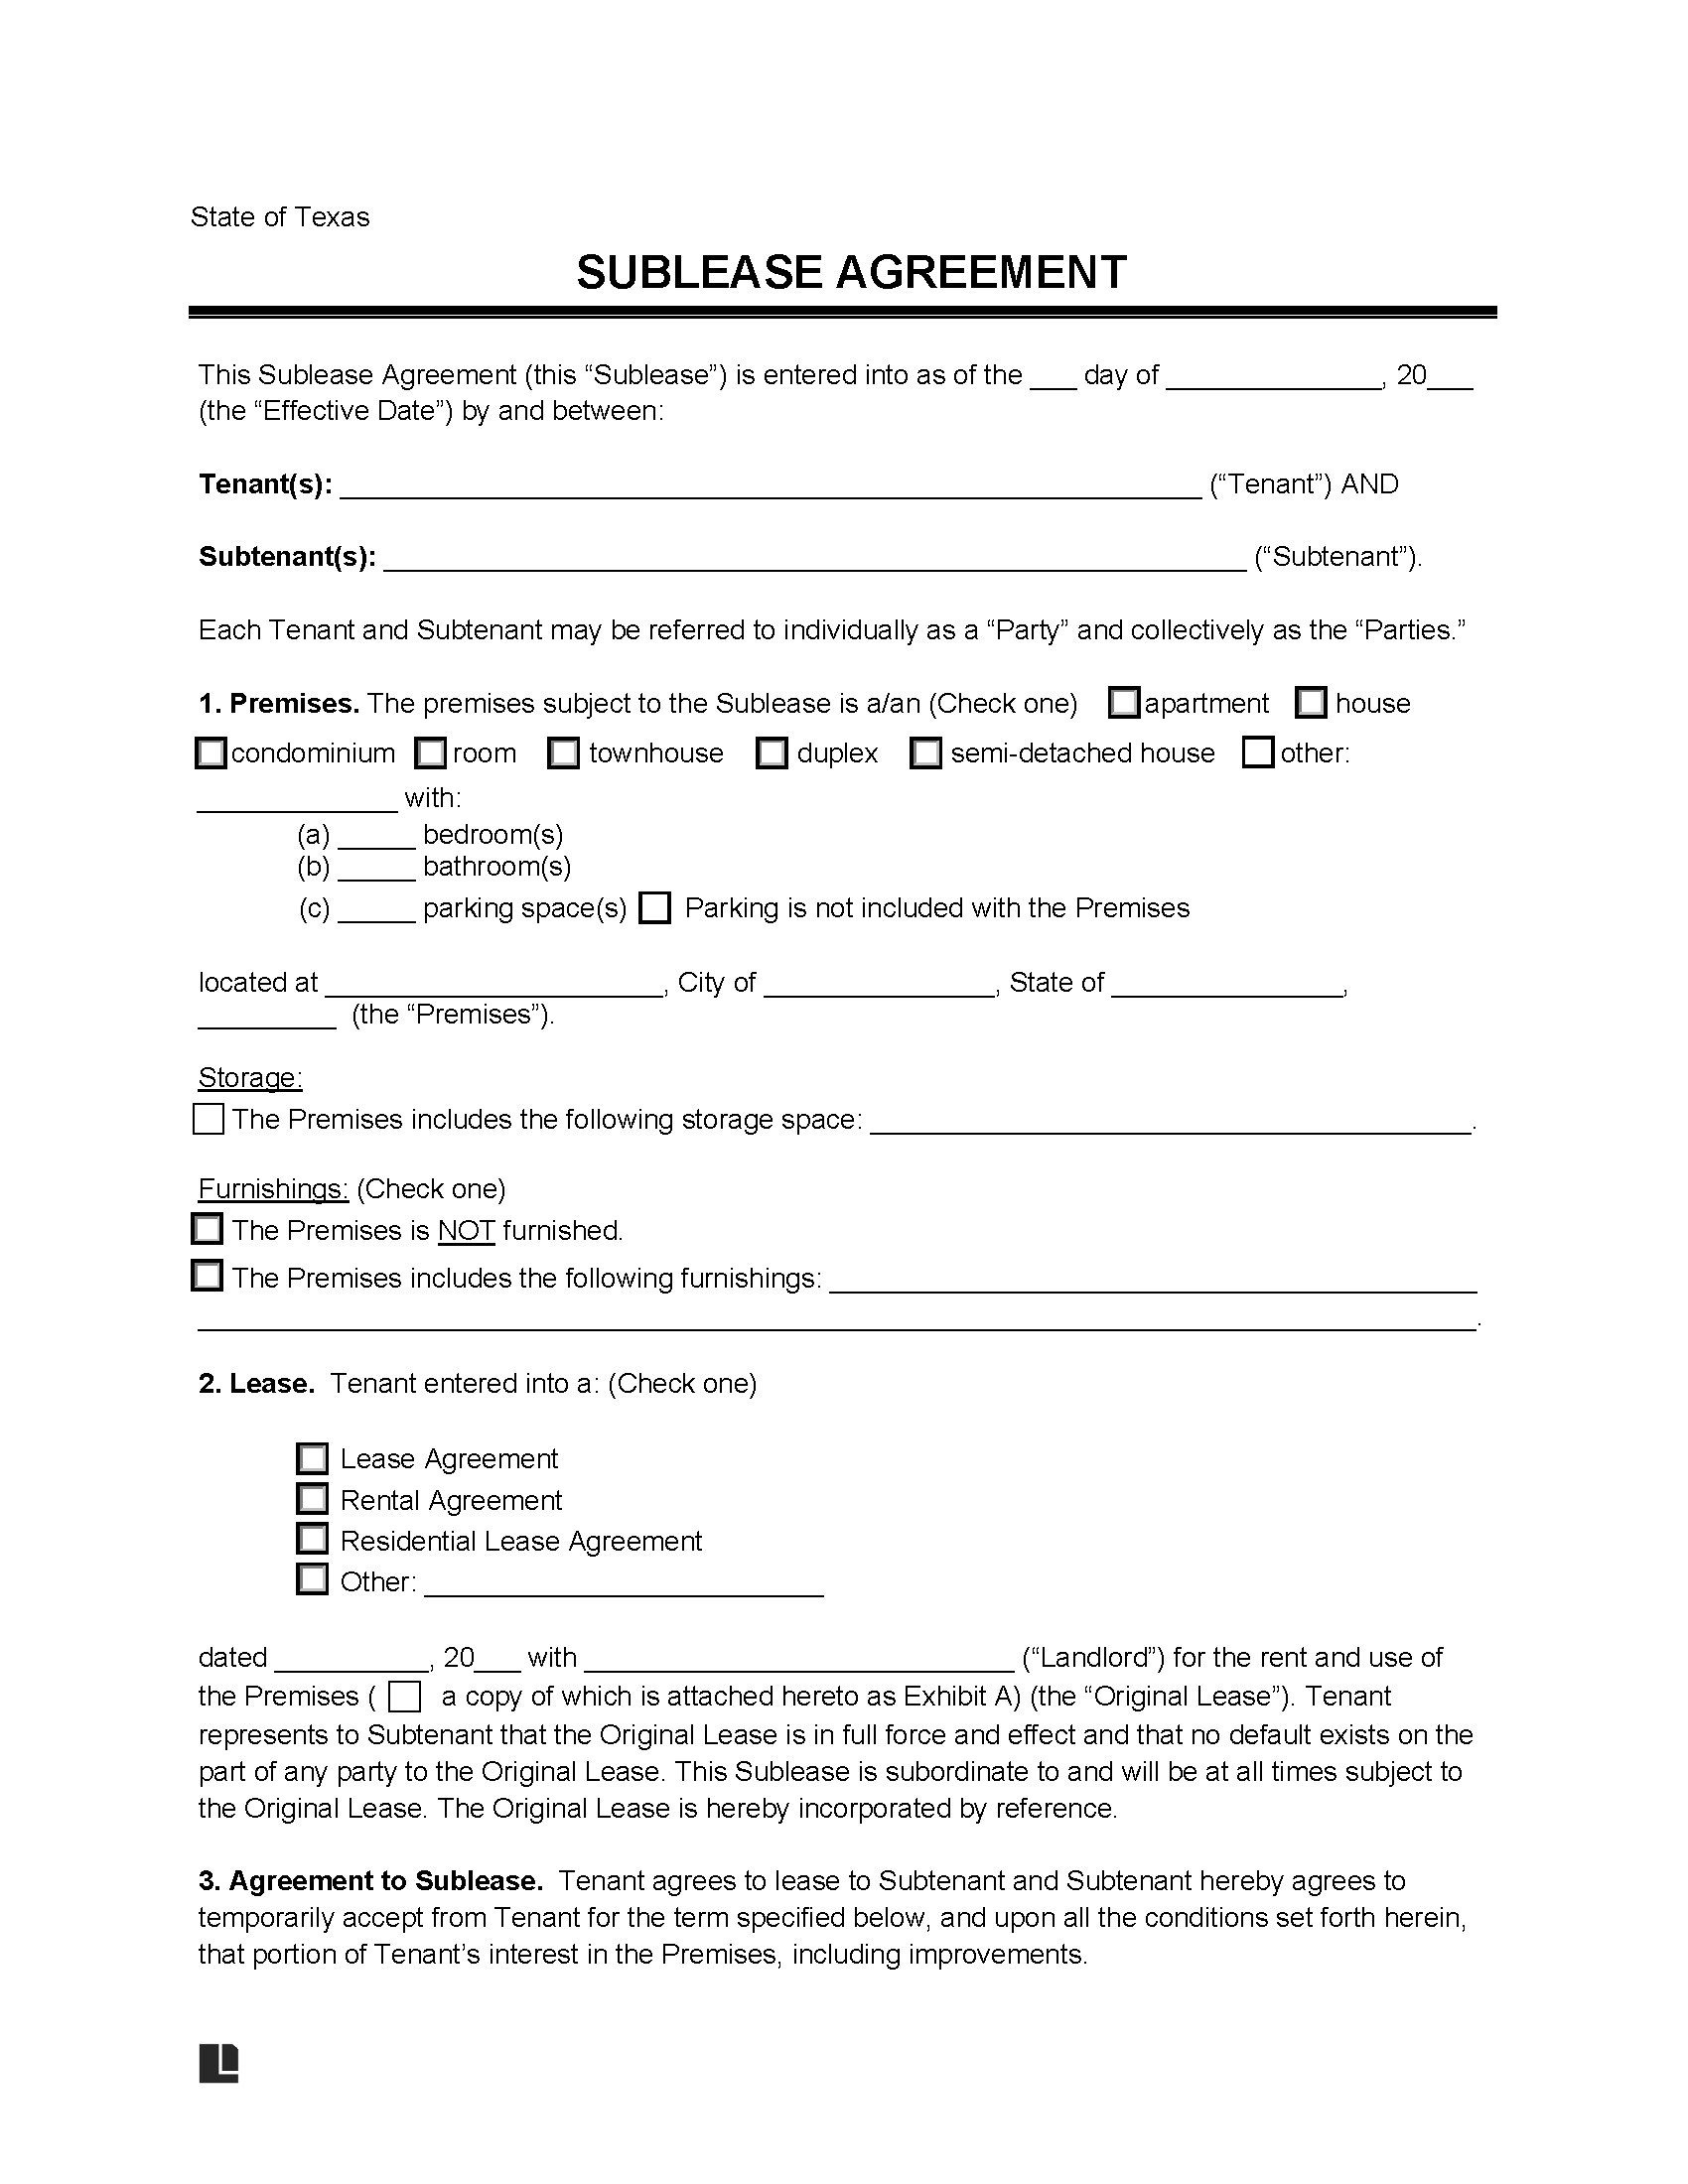 free-texas-sublease-agreement-template-pdf-word-rtf